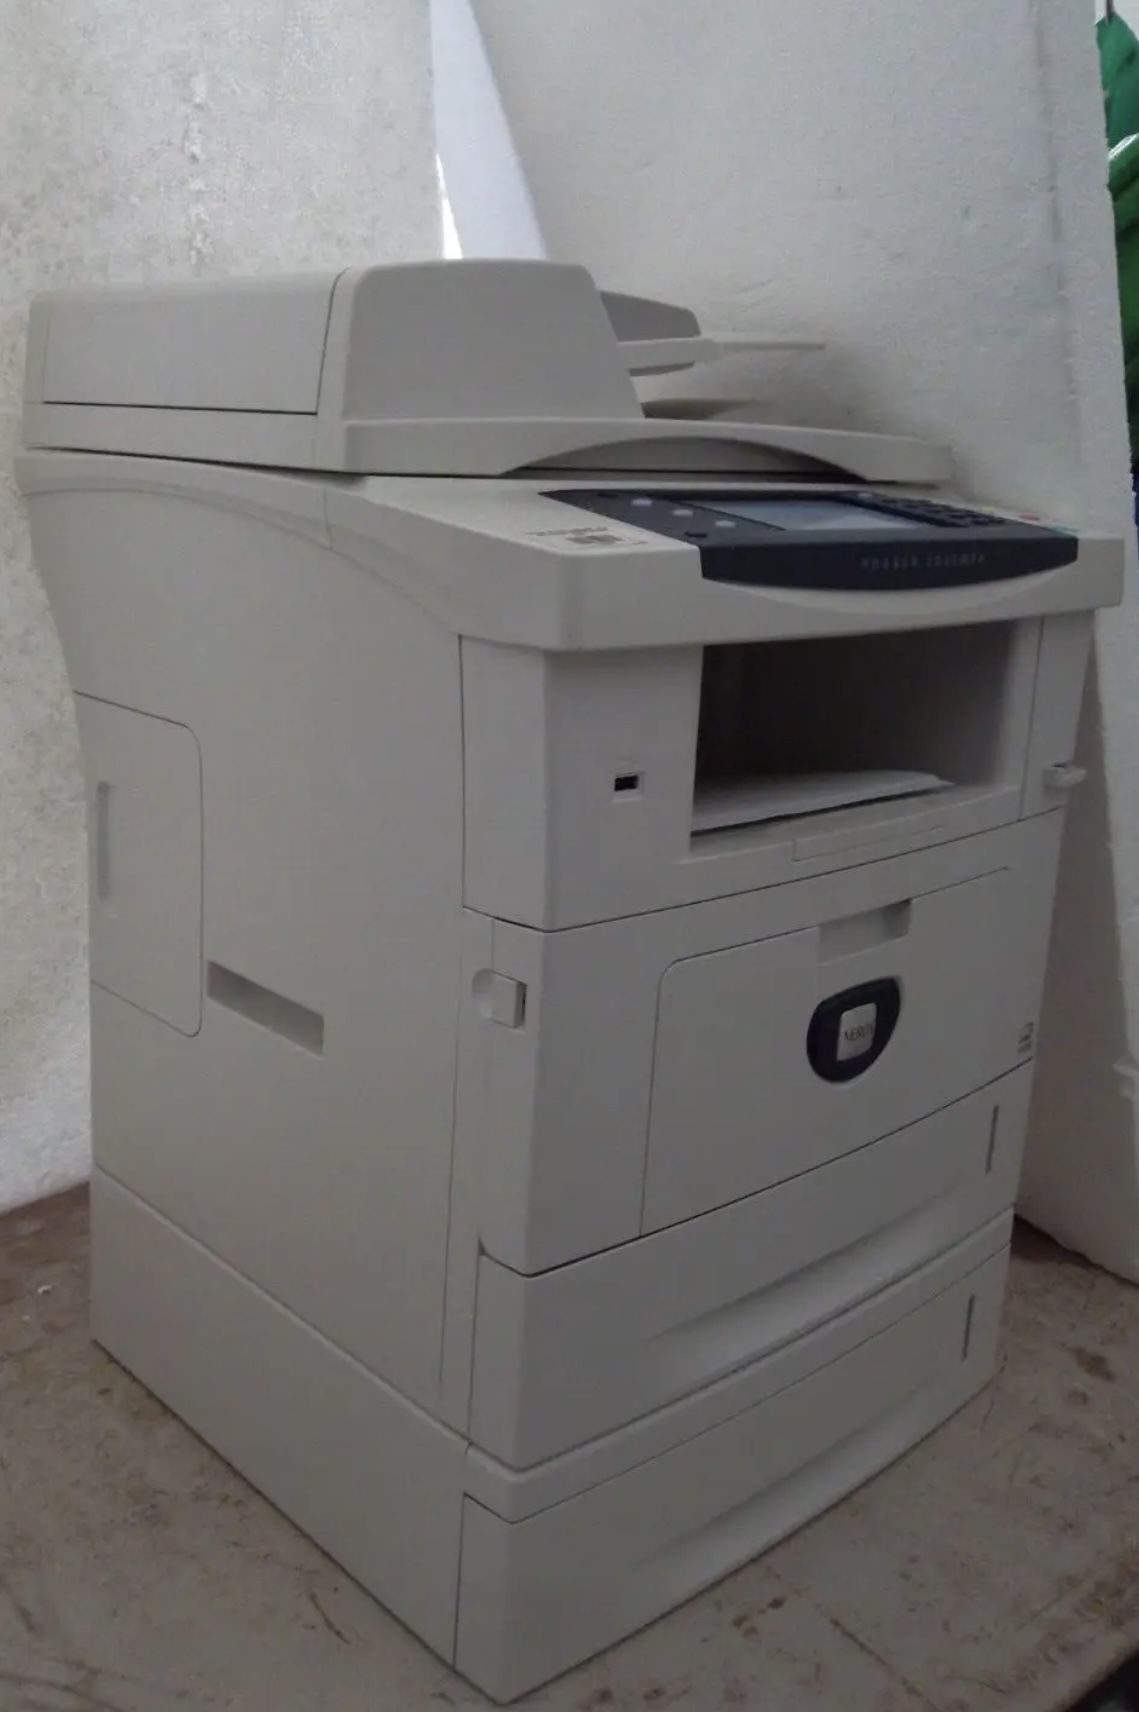 Xerox Phaser 3635MFP MFP Printer Fax Scan Copy USB LAN Duplex 7" Color LCD Touch